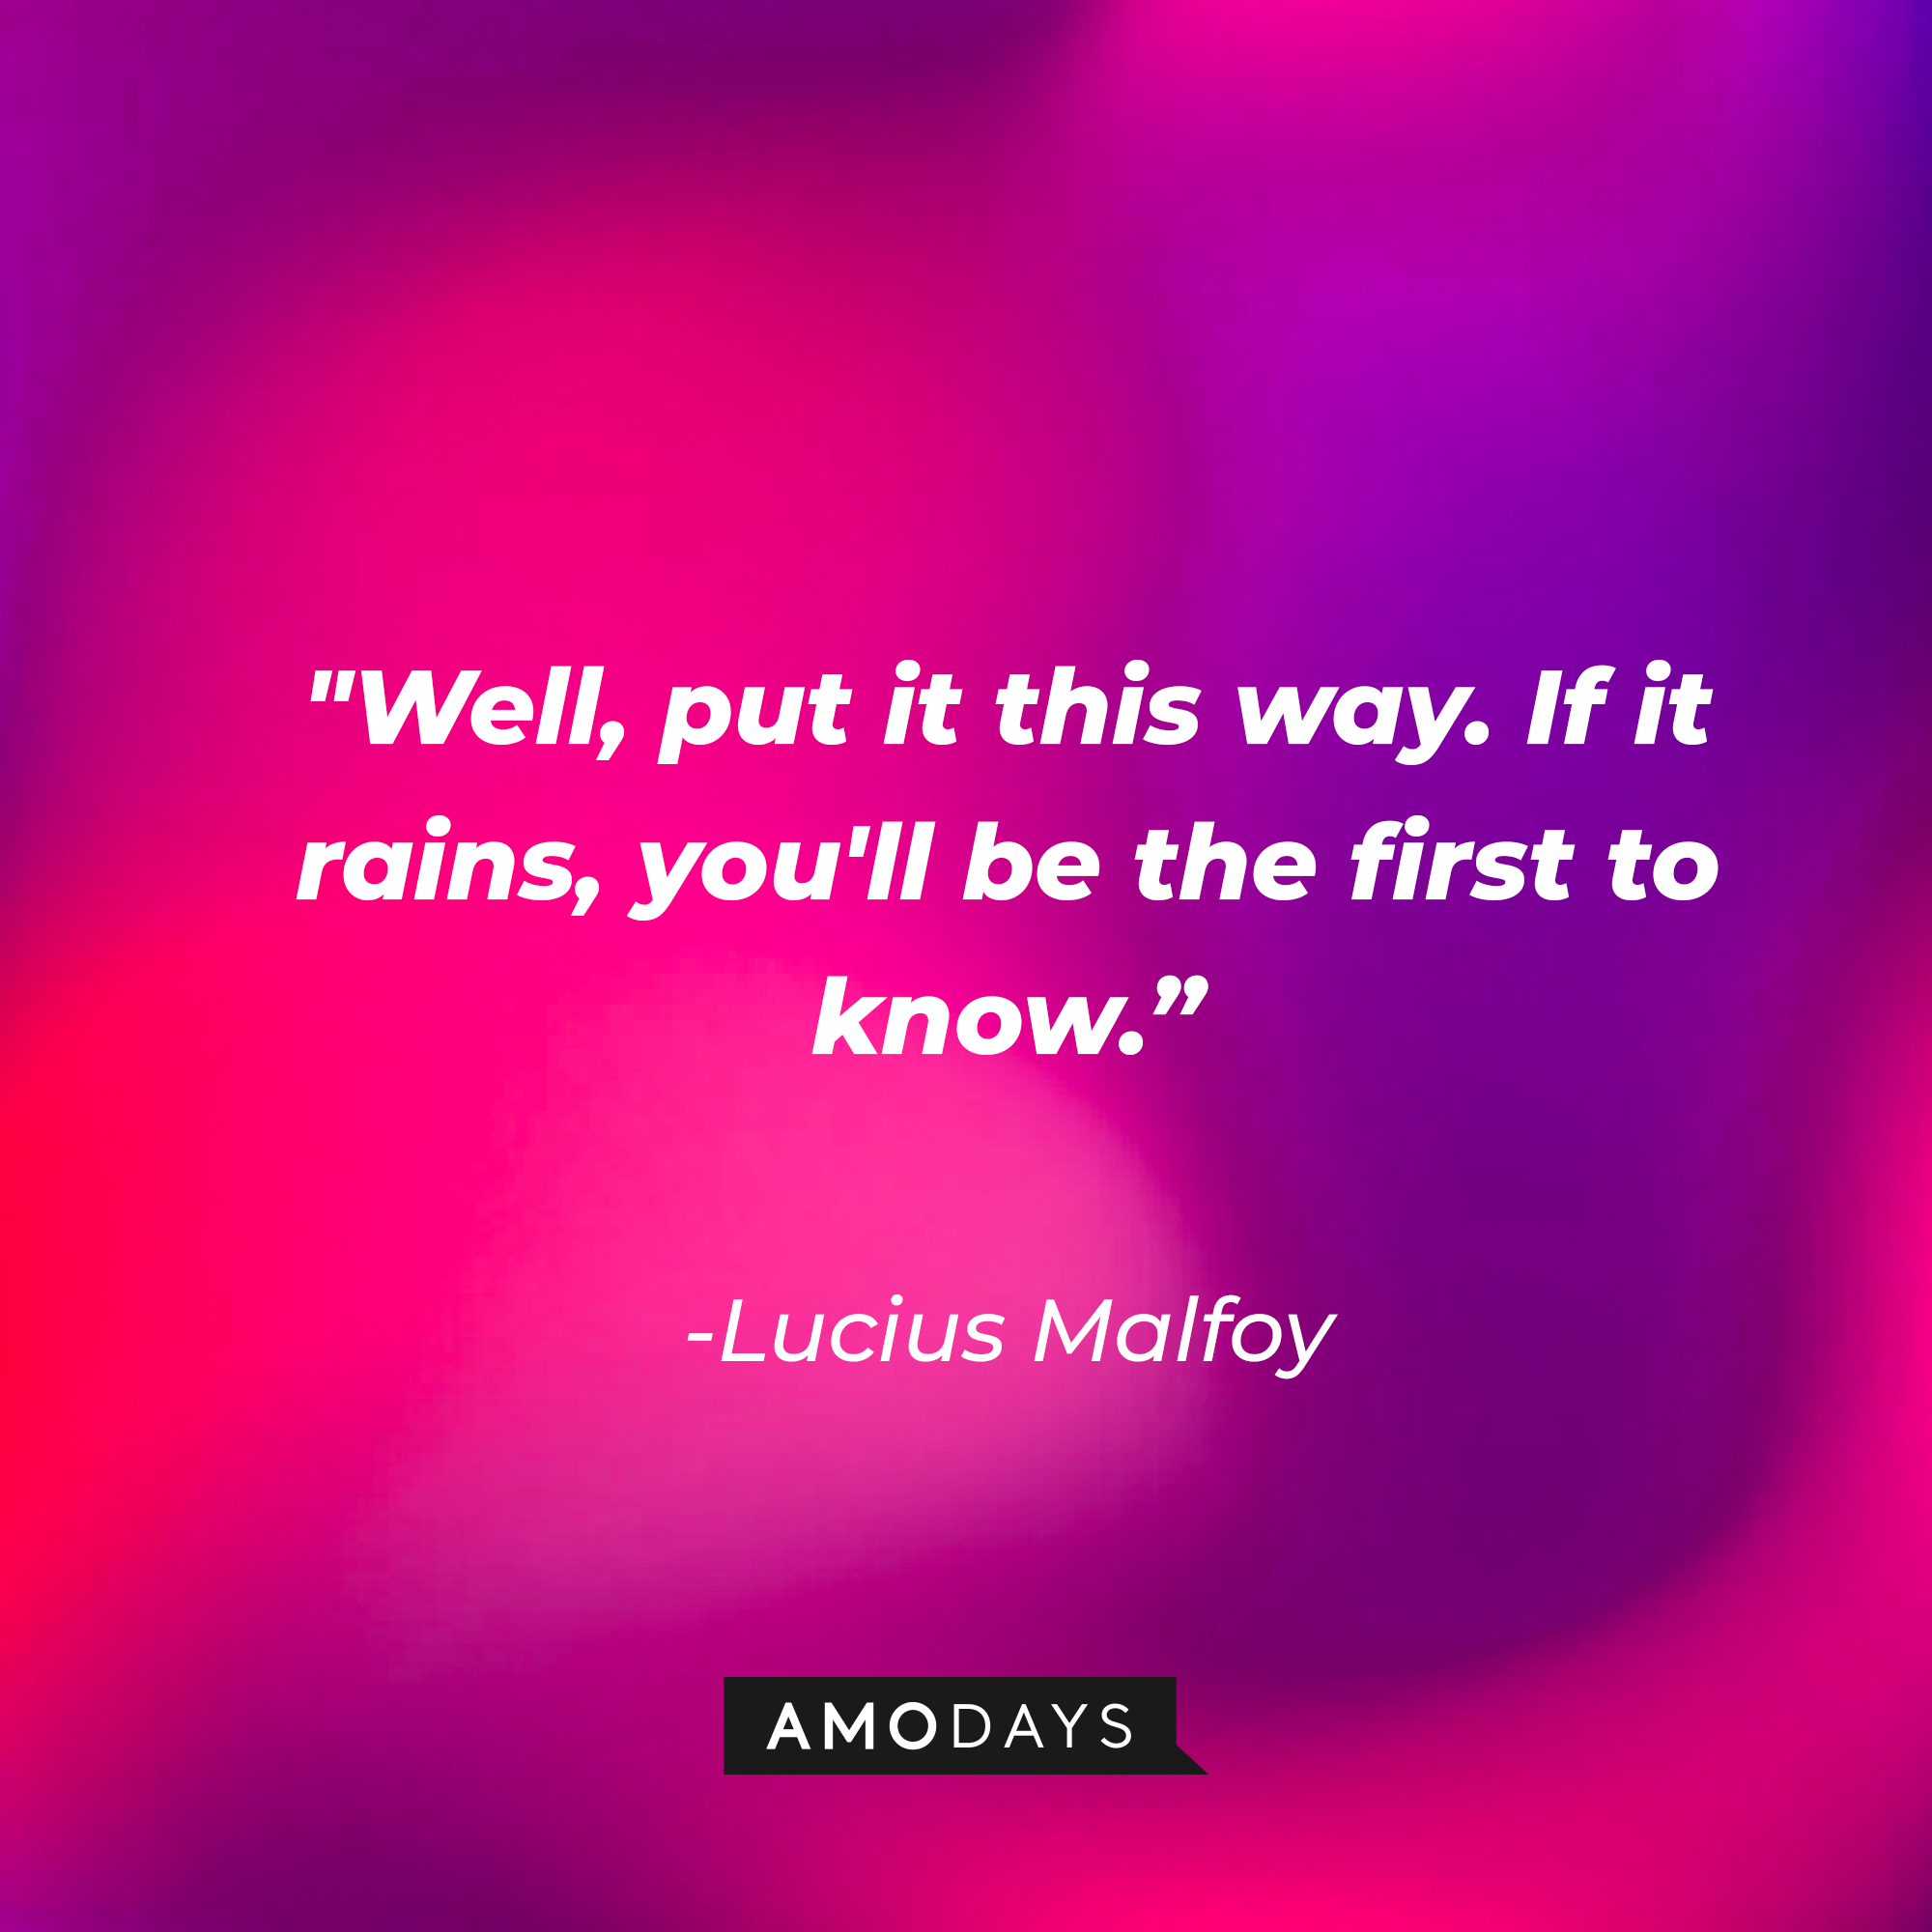 Lucius Malfoy's quote: "Well, put it this way. If it rains, you'll be the first to know." | Image: Amodays